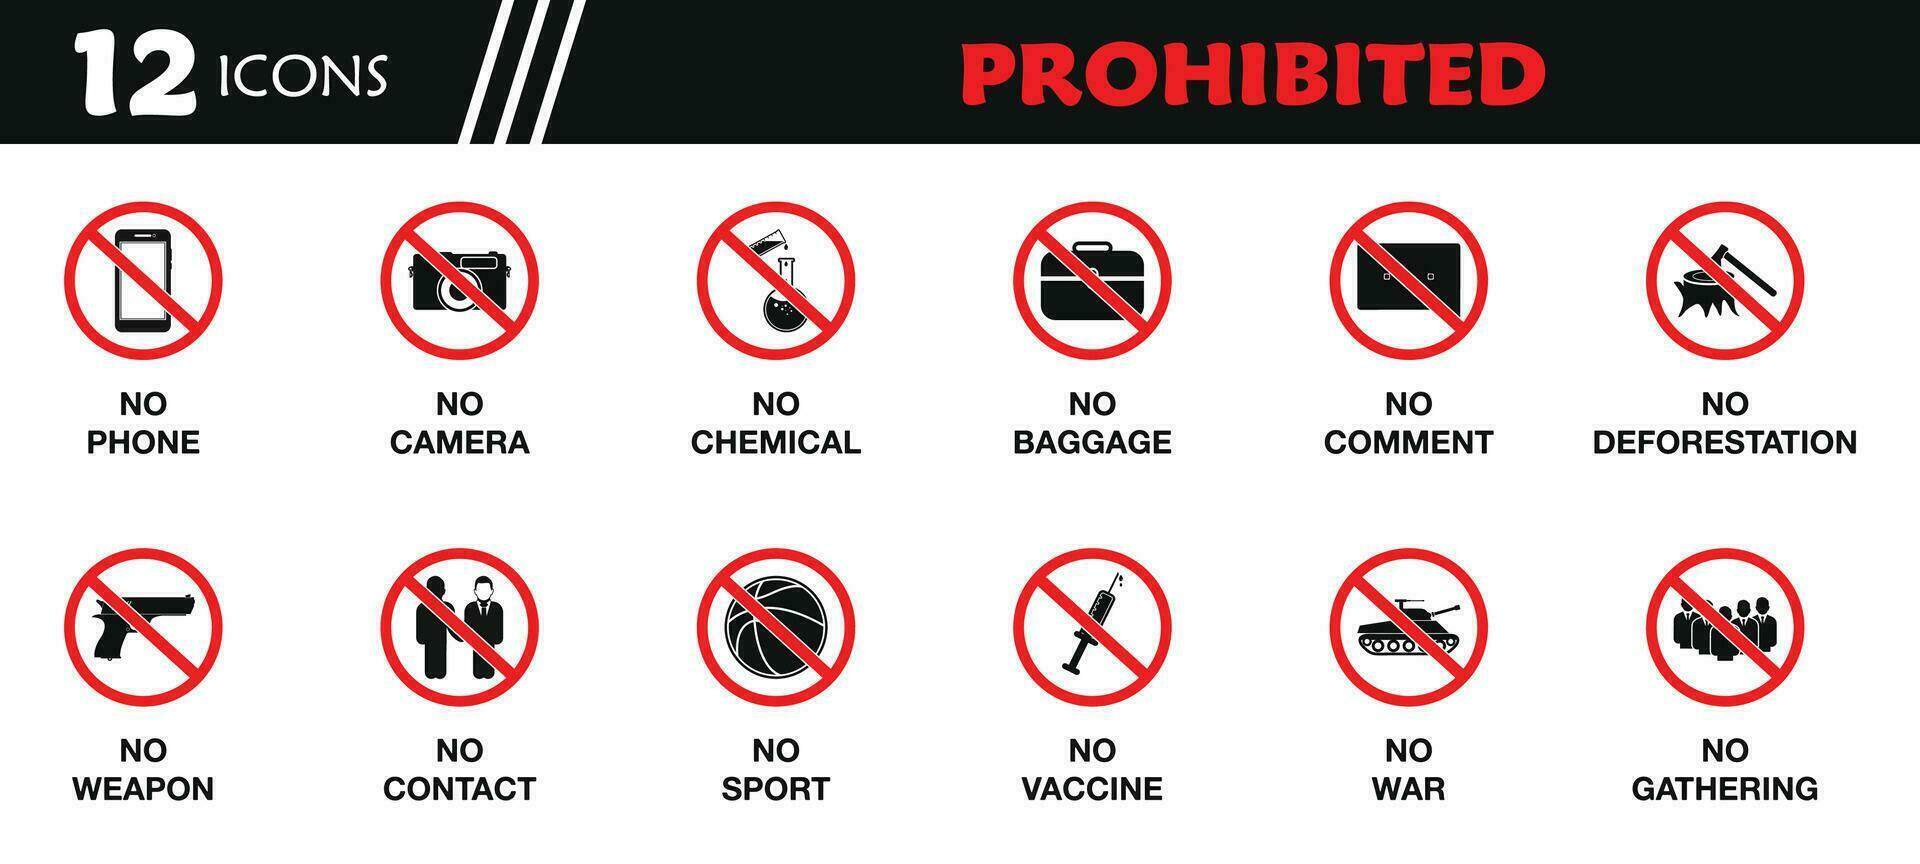 Prohibited Icon Set. Collection of No Phone, Camera, Weapon, Chemical, Baggage, Comment, Contact, Vaccine, War, Sport, Public Gathering and More Icons. Editable Flat Vector Illustration.